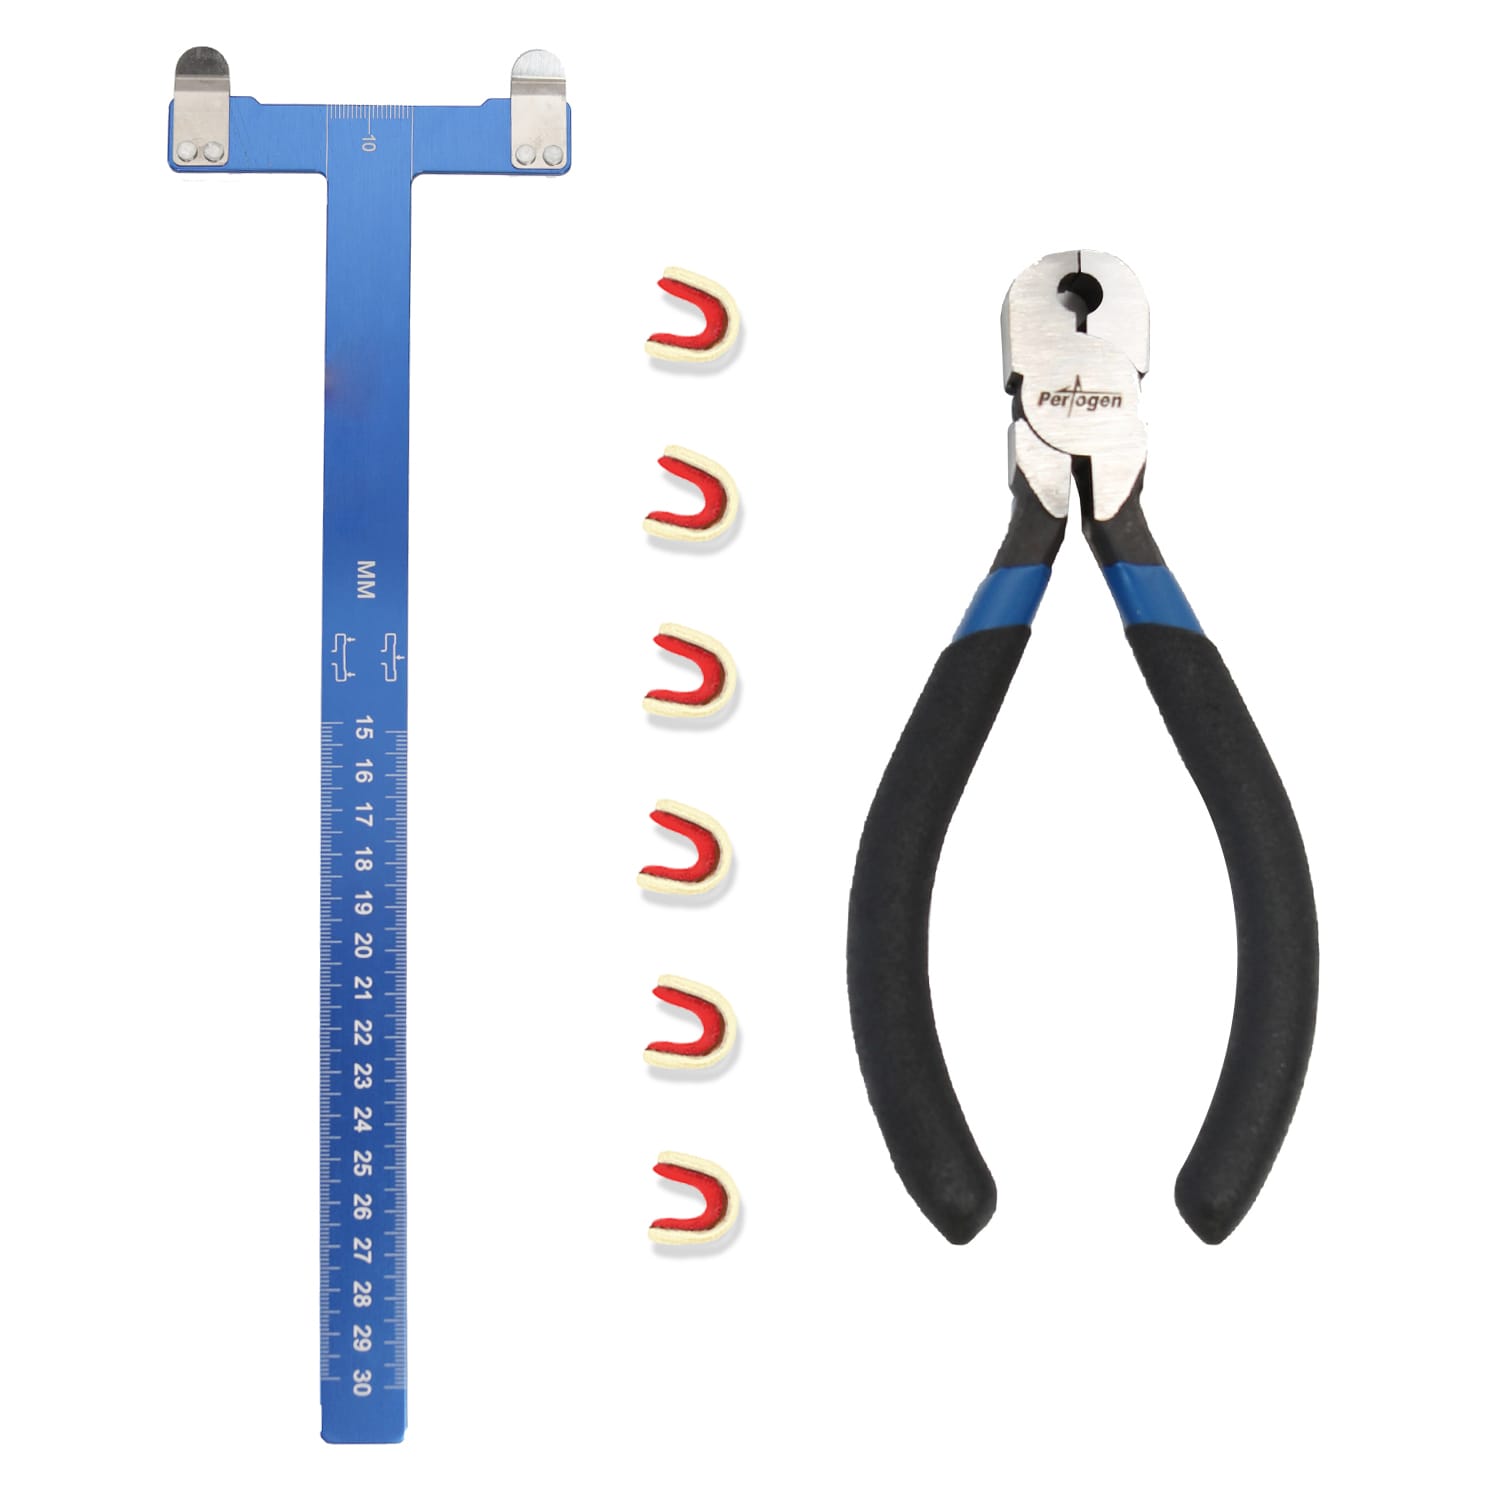 T Bow Square/Pliers/Nocking Points/String Silencer Archery Accessories Kit 